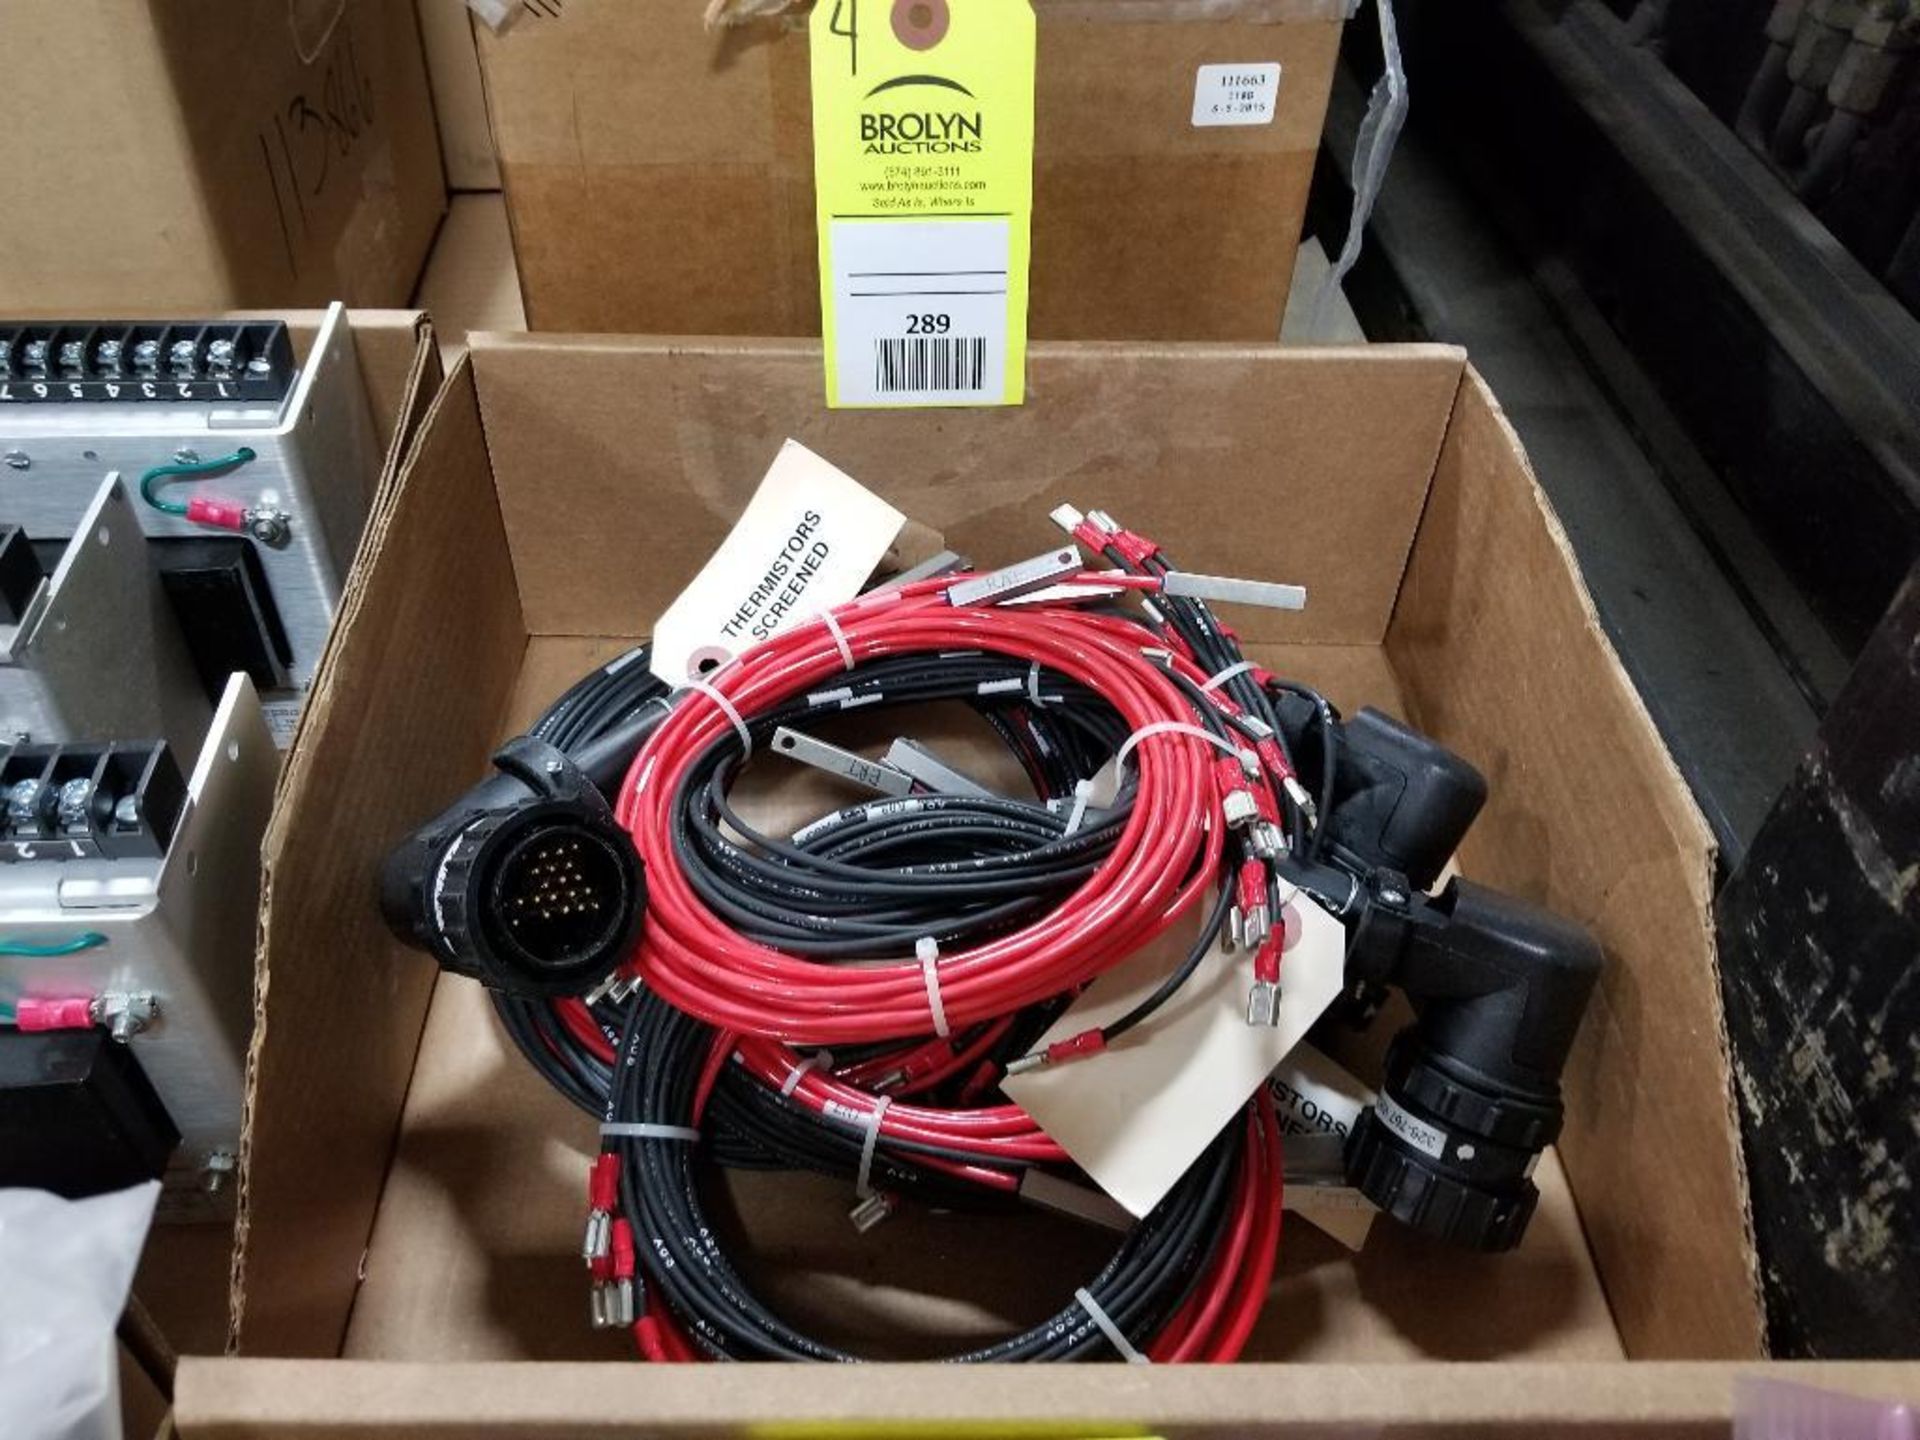 Qty 4 - Cable assemblies. New.